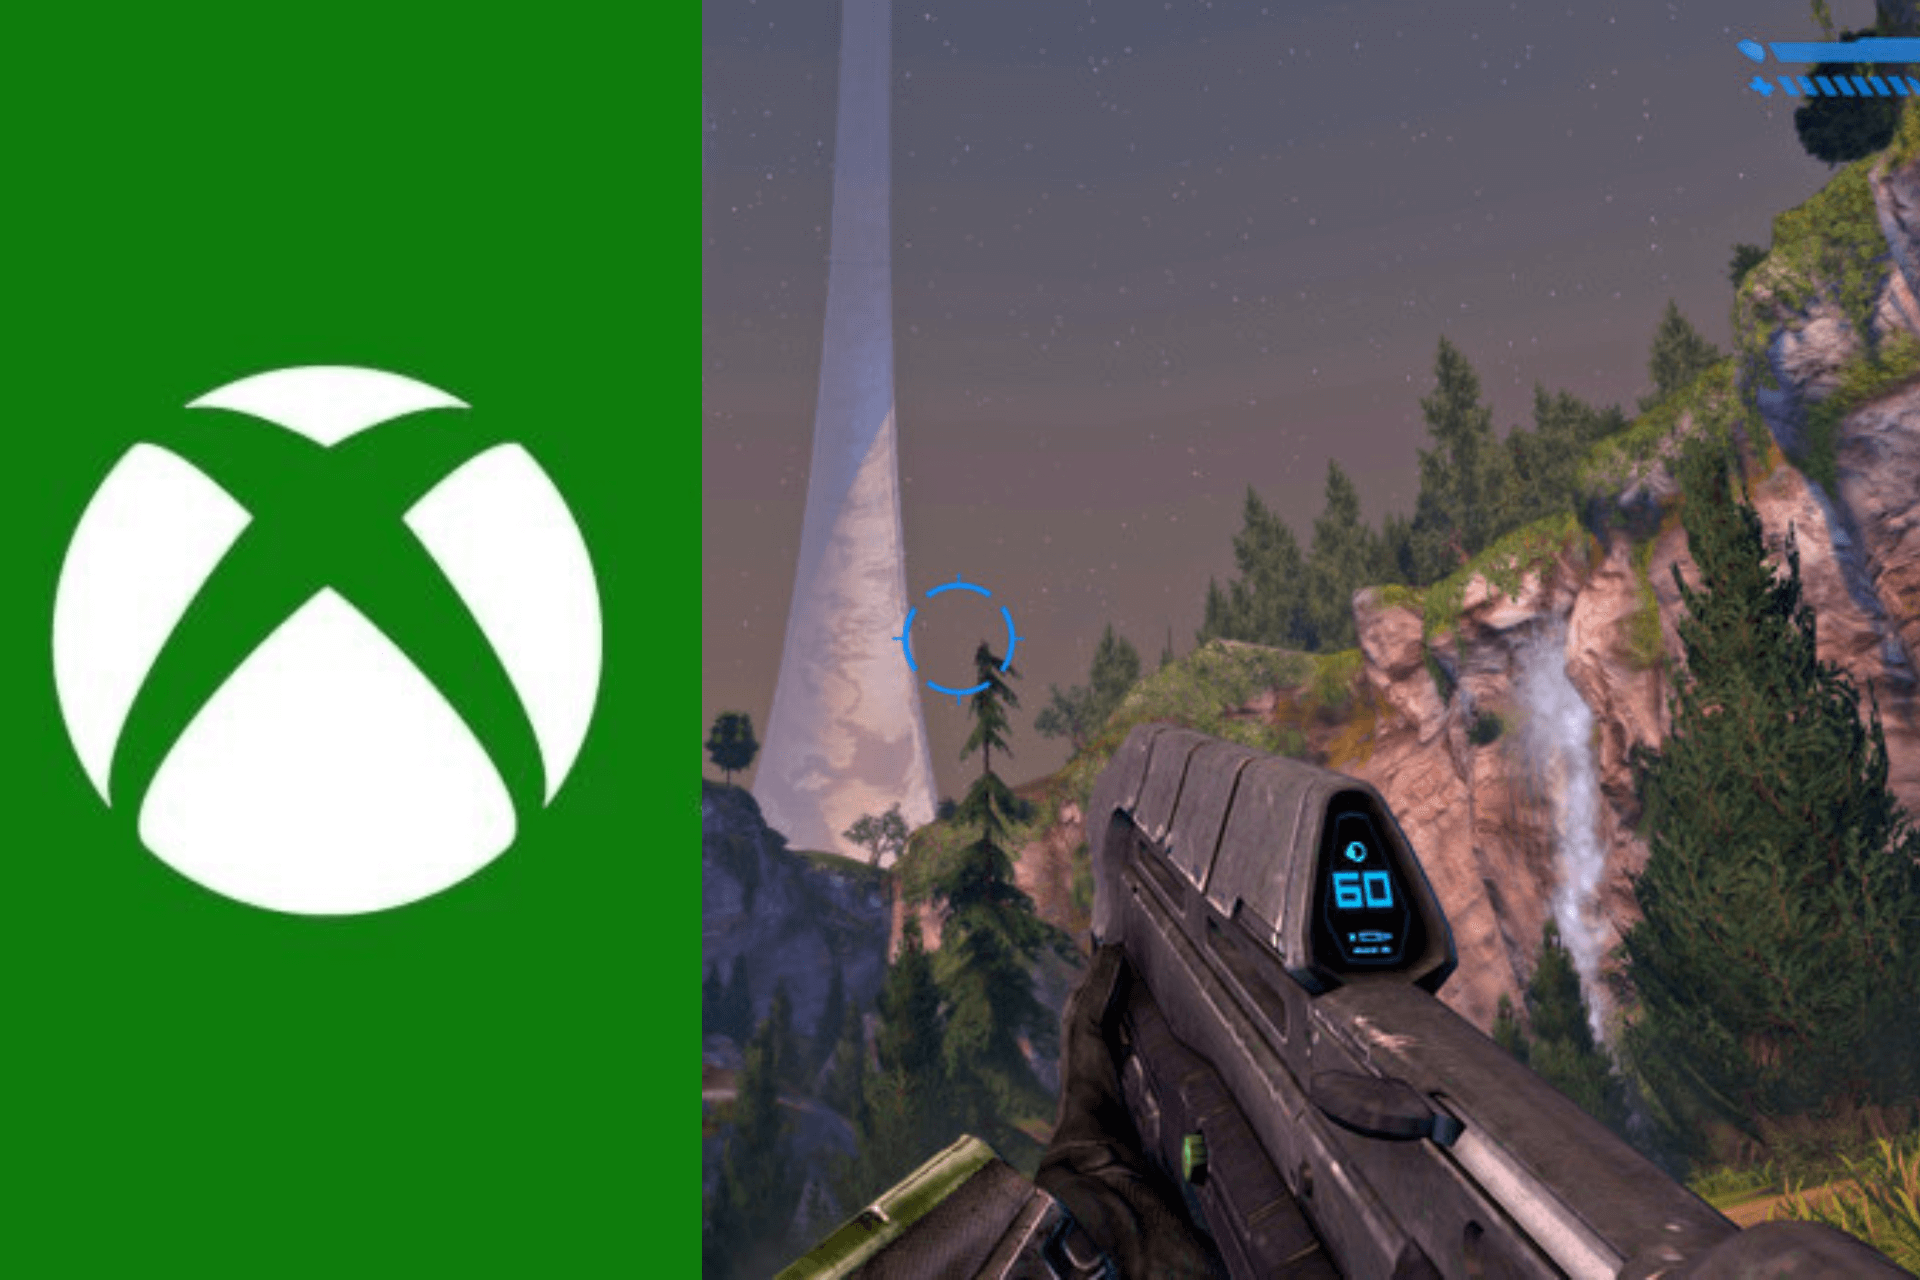 Did you know Microsoft ended Halo MCC development last July?